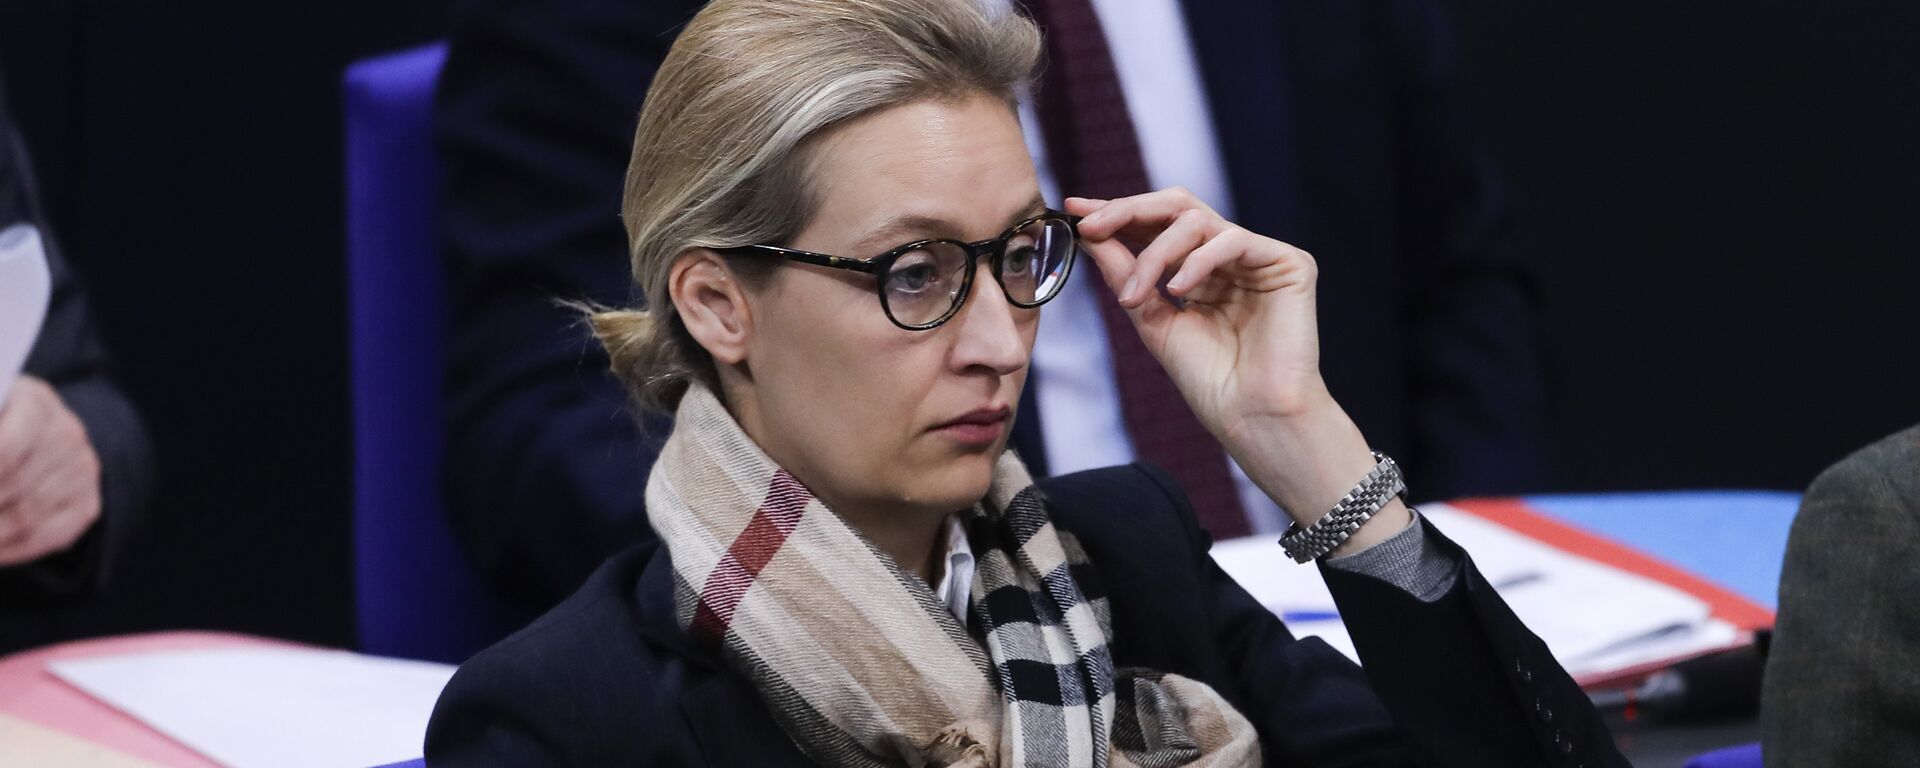 Alice Weidel parliament faction co-leader of the Alternative for Germany, AfD, party, arrives at the German parliament Bundestag prior to a debate about refugee policy in Germany, in Berlin, Friday, Jan. 19, 2018 - Sputnik International, 1920, 22.01.2024